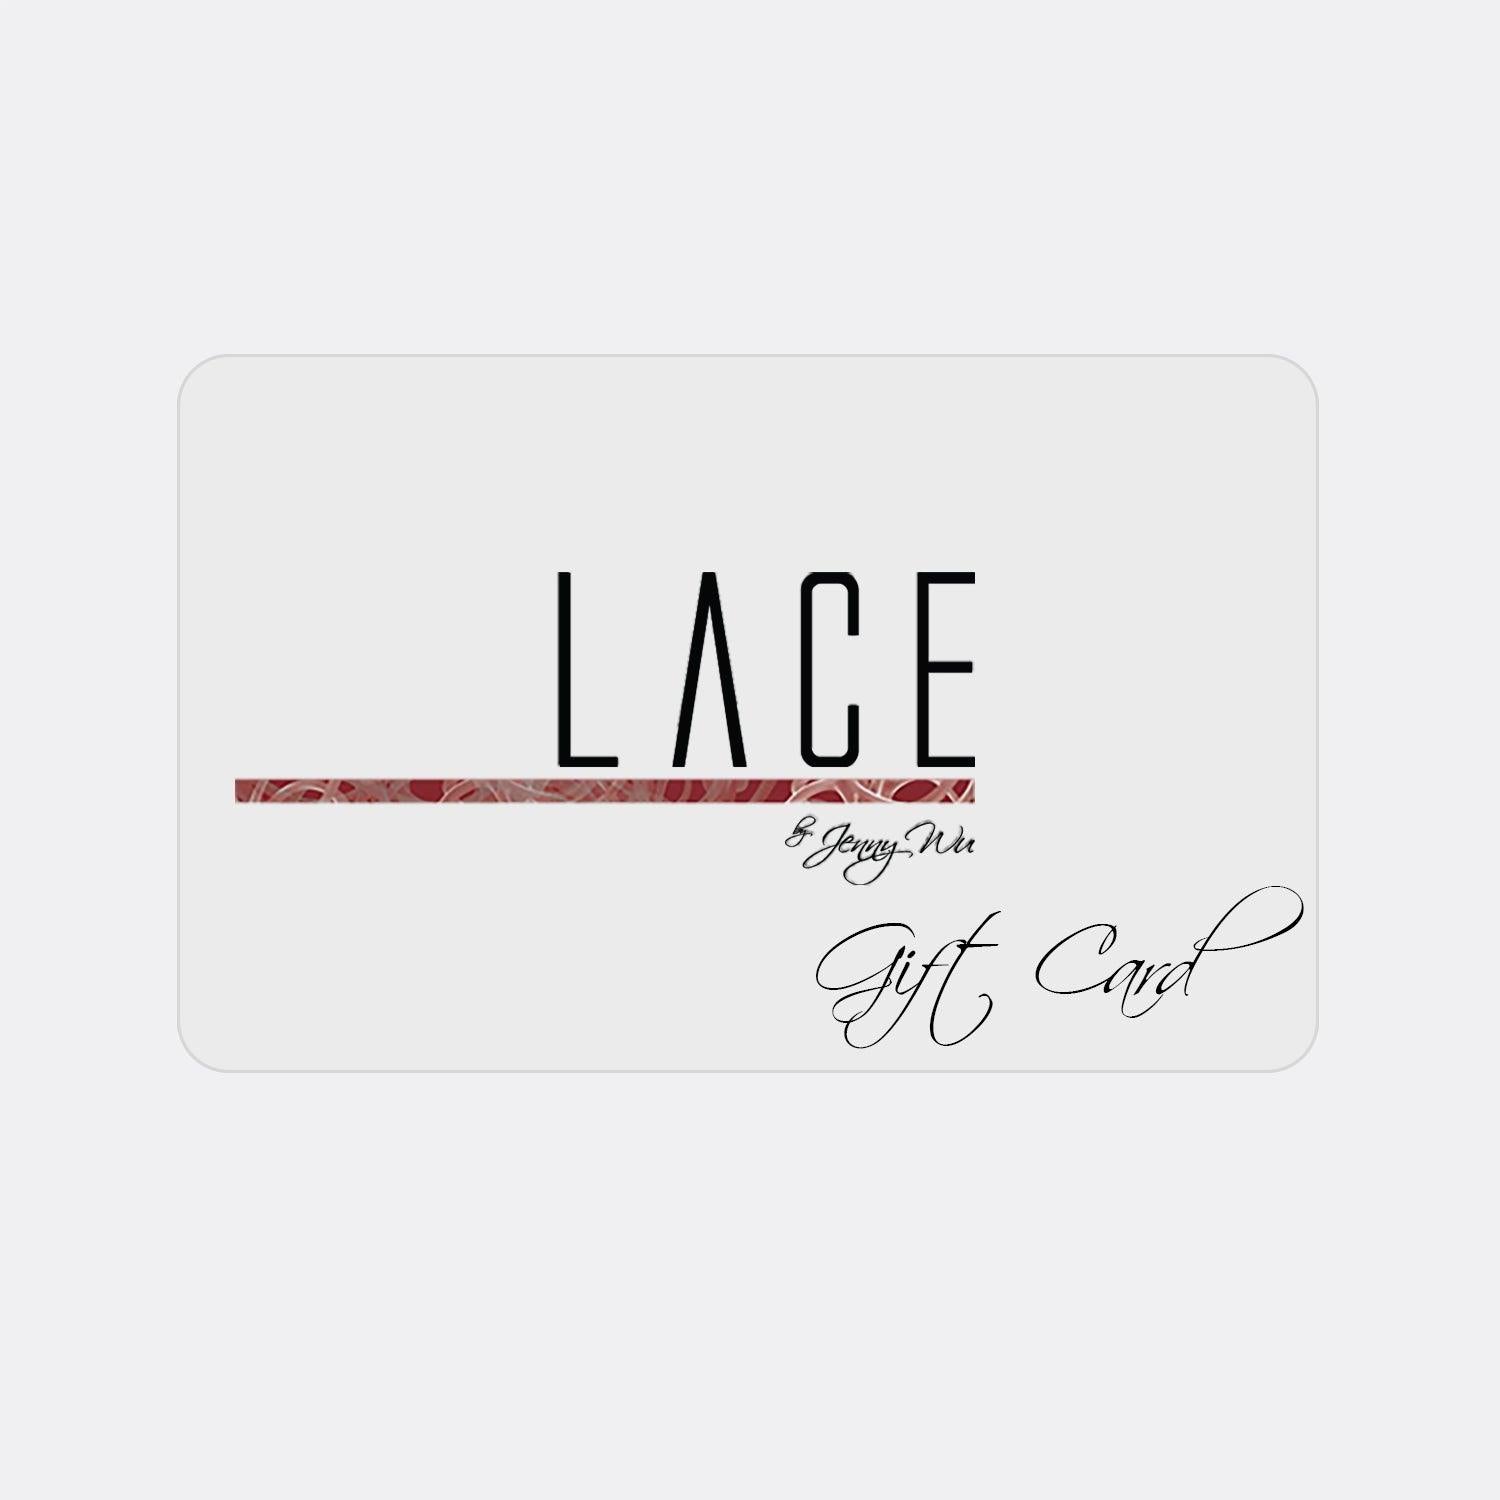 Gift Card - LACE by JennyWu